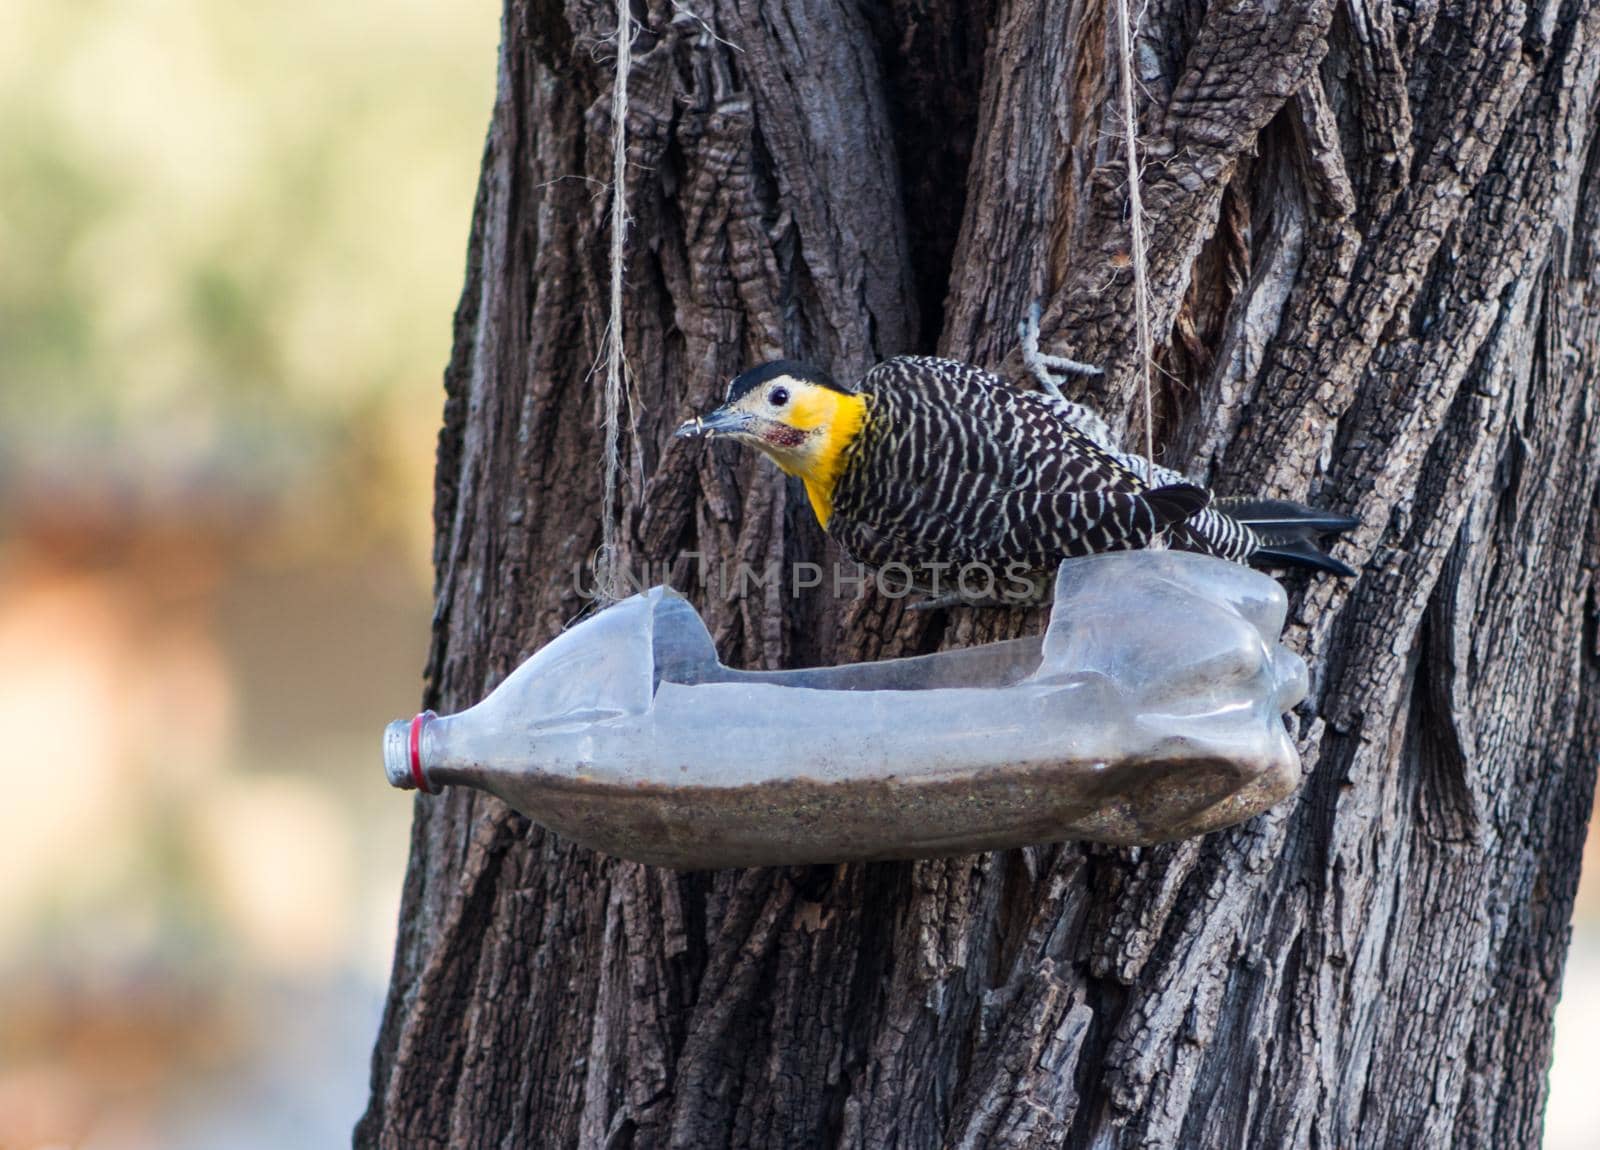 a woodpecker eating from the repurposed bottle feeder